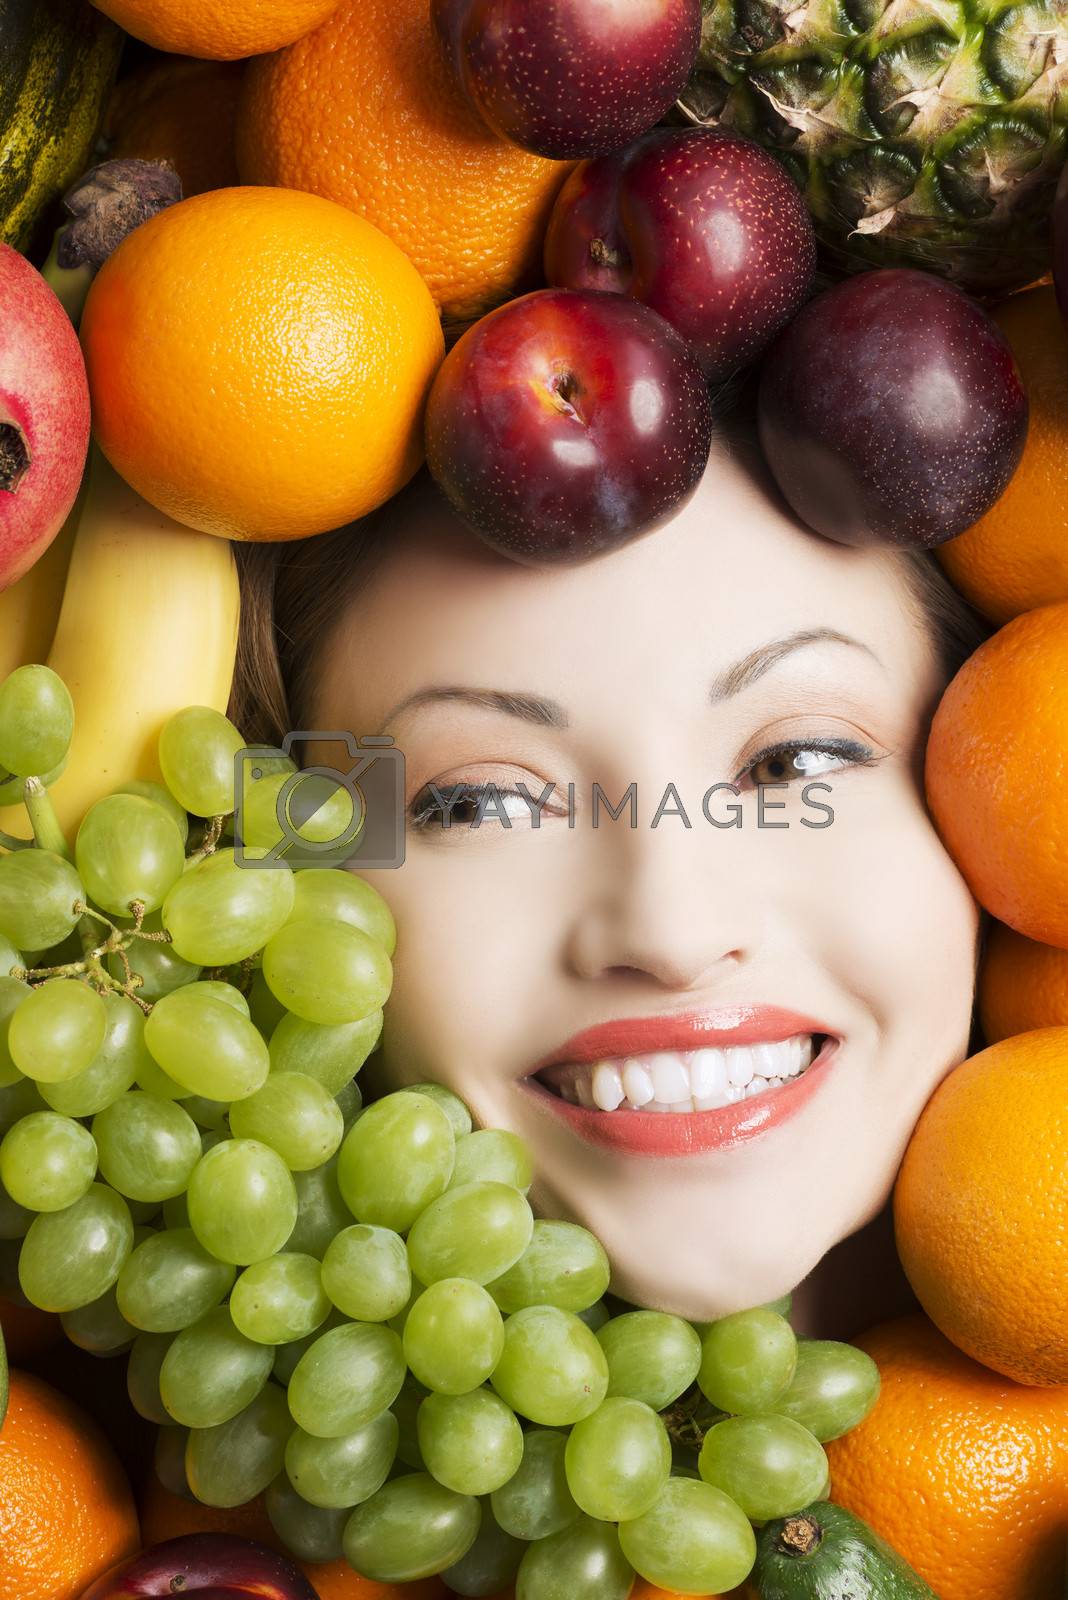 Royalty free image of Woman face in fruits. by BDS